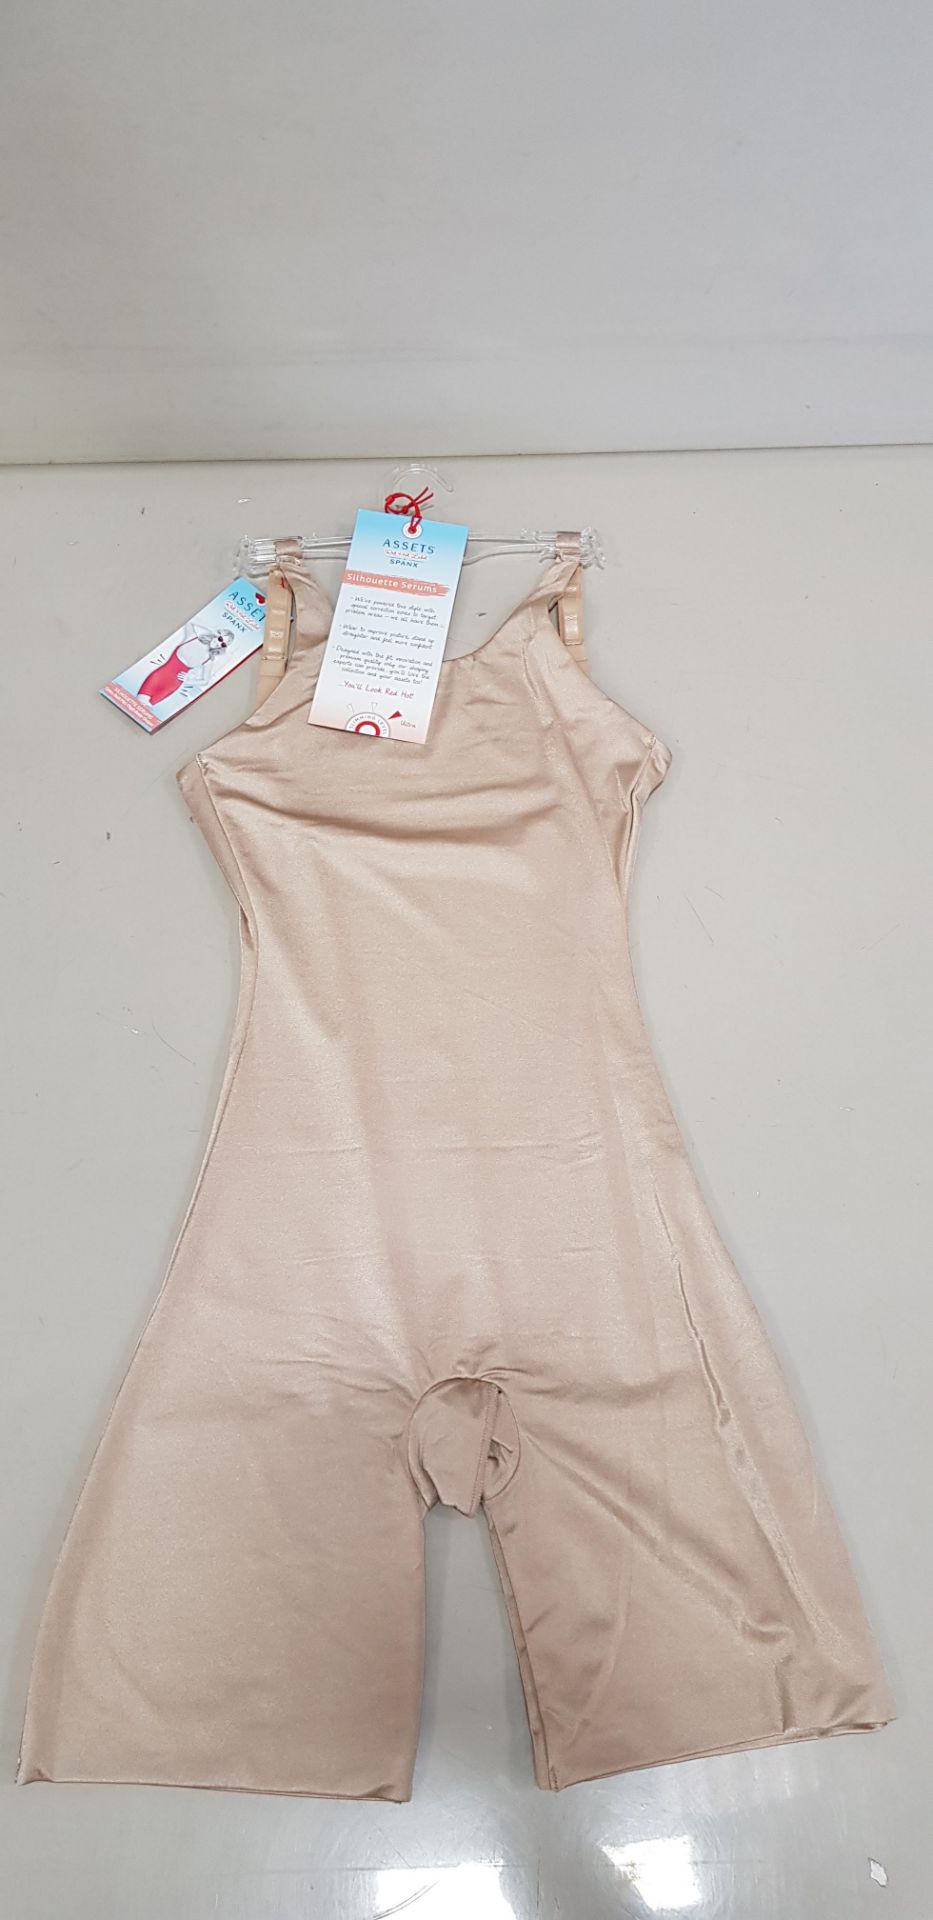 25 X BRAND NEW SPANX OPEN BUST MID THIGH BODY SHAPERS IN VERY BARE SIZE SMALL